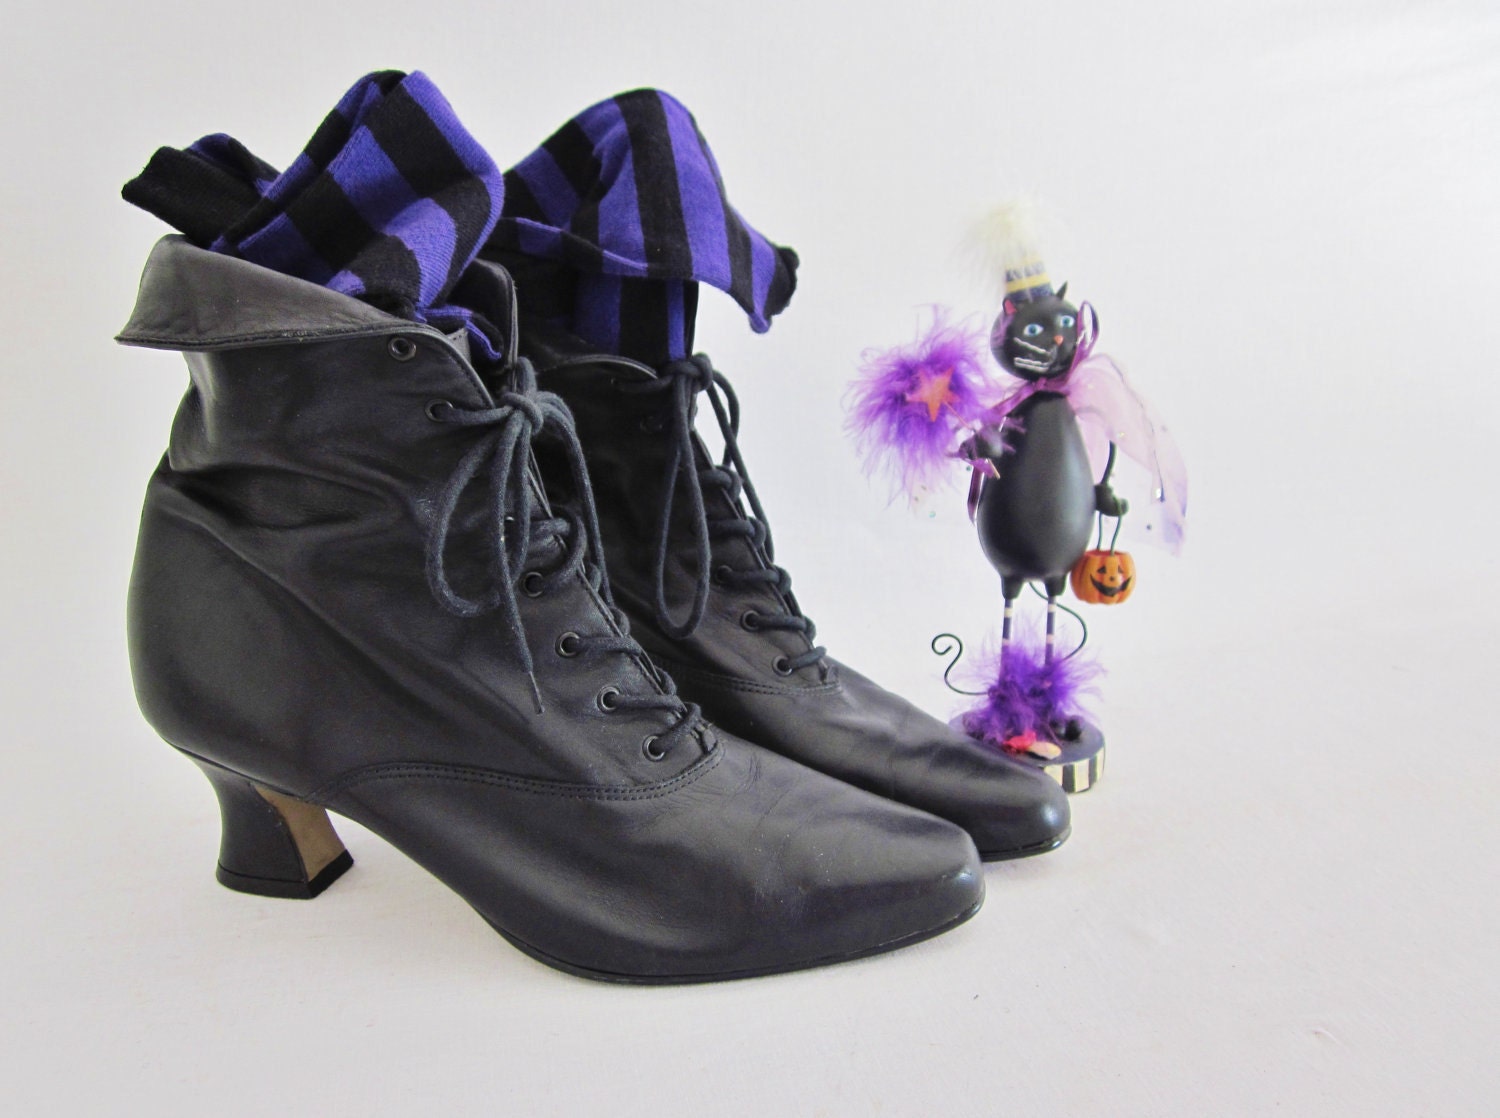 Vintage Granny Boots Halloween Witches Shoes with Purple stripes socks Goth Costume Decor